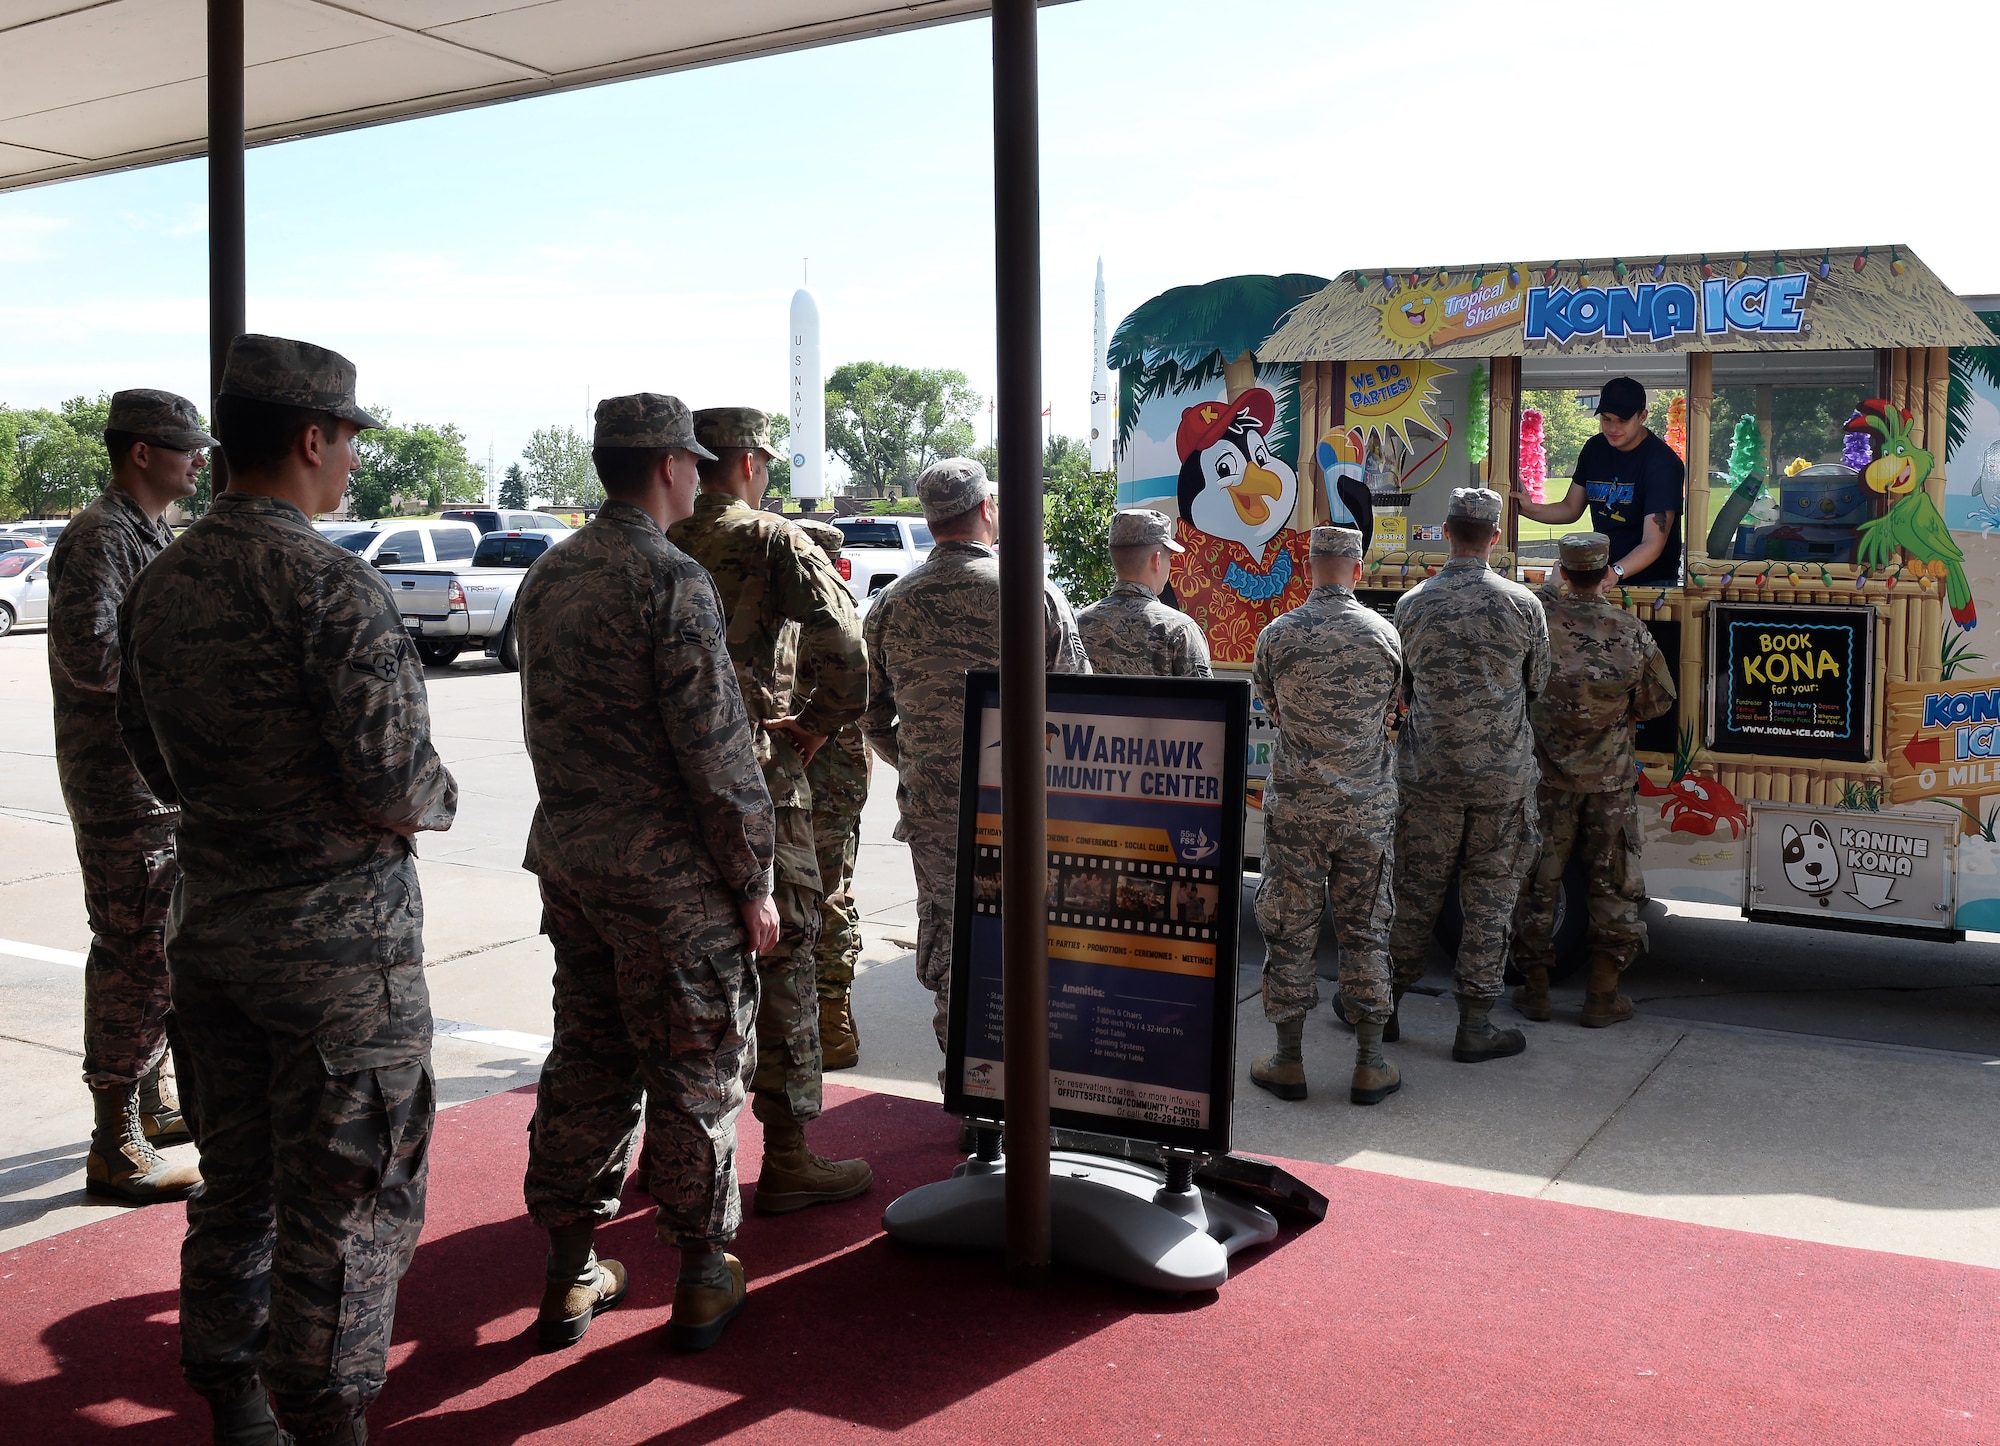 Team Offutt members line up June 20, 2019, outside the Kona Ice truck during the shaved ice event at the Warhawk Community Center on Offutt Air Force Base, Nebraska. It was a special way to give back to the Team Offutt members who were displaced by this year’s historic flood. (U.S. Air Force photo by Charles J. Haymond)